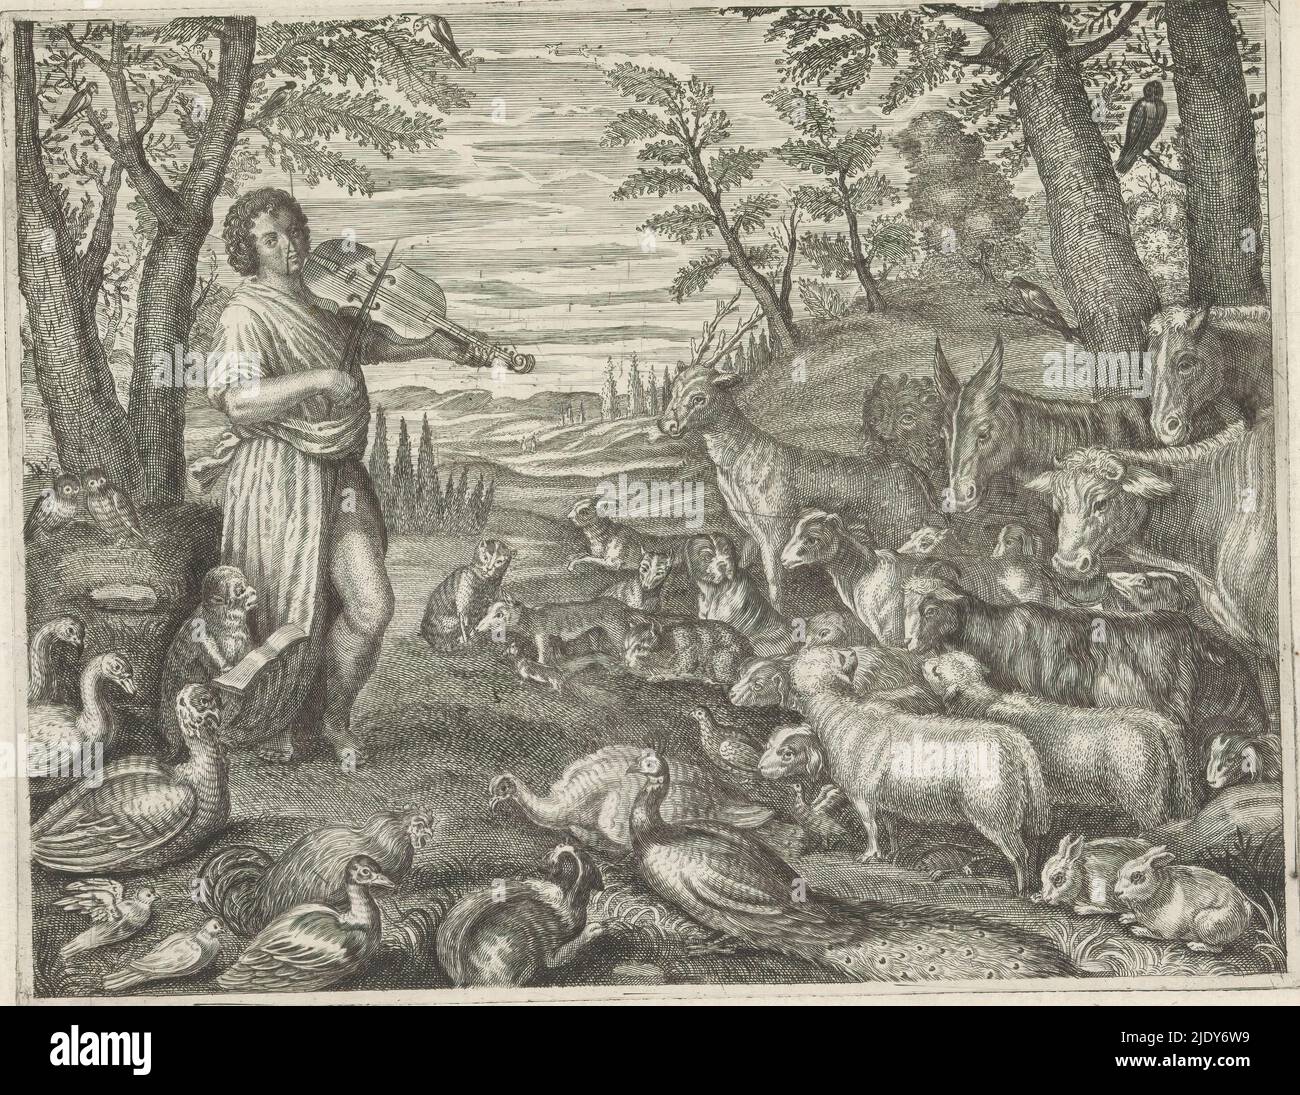 Orpheus enchants the animals with his music, Metamorphoses of Ovid (series title), Orpheus stands under a tree and plays his lira da braccio. Several animals sit around him and listen to his playing., print maker: Crispijn van de Passe (II), after painting by: Leandro Bassano, publisher: Crispijn van de Passe (II), (attributed to), Venice, c. 1636 - 1670, paper, engraving, height 167 mm × width 216 mm Stock Photo